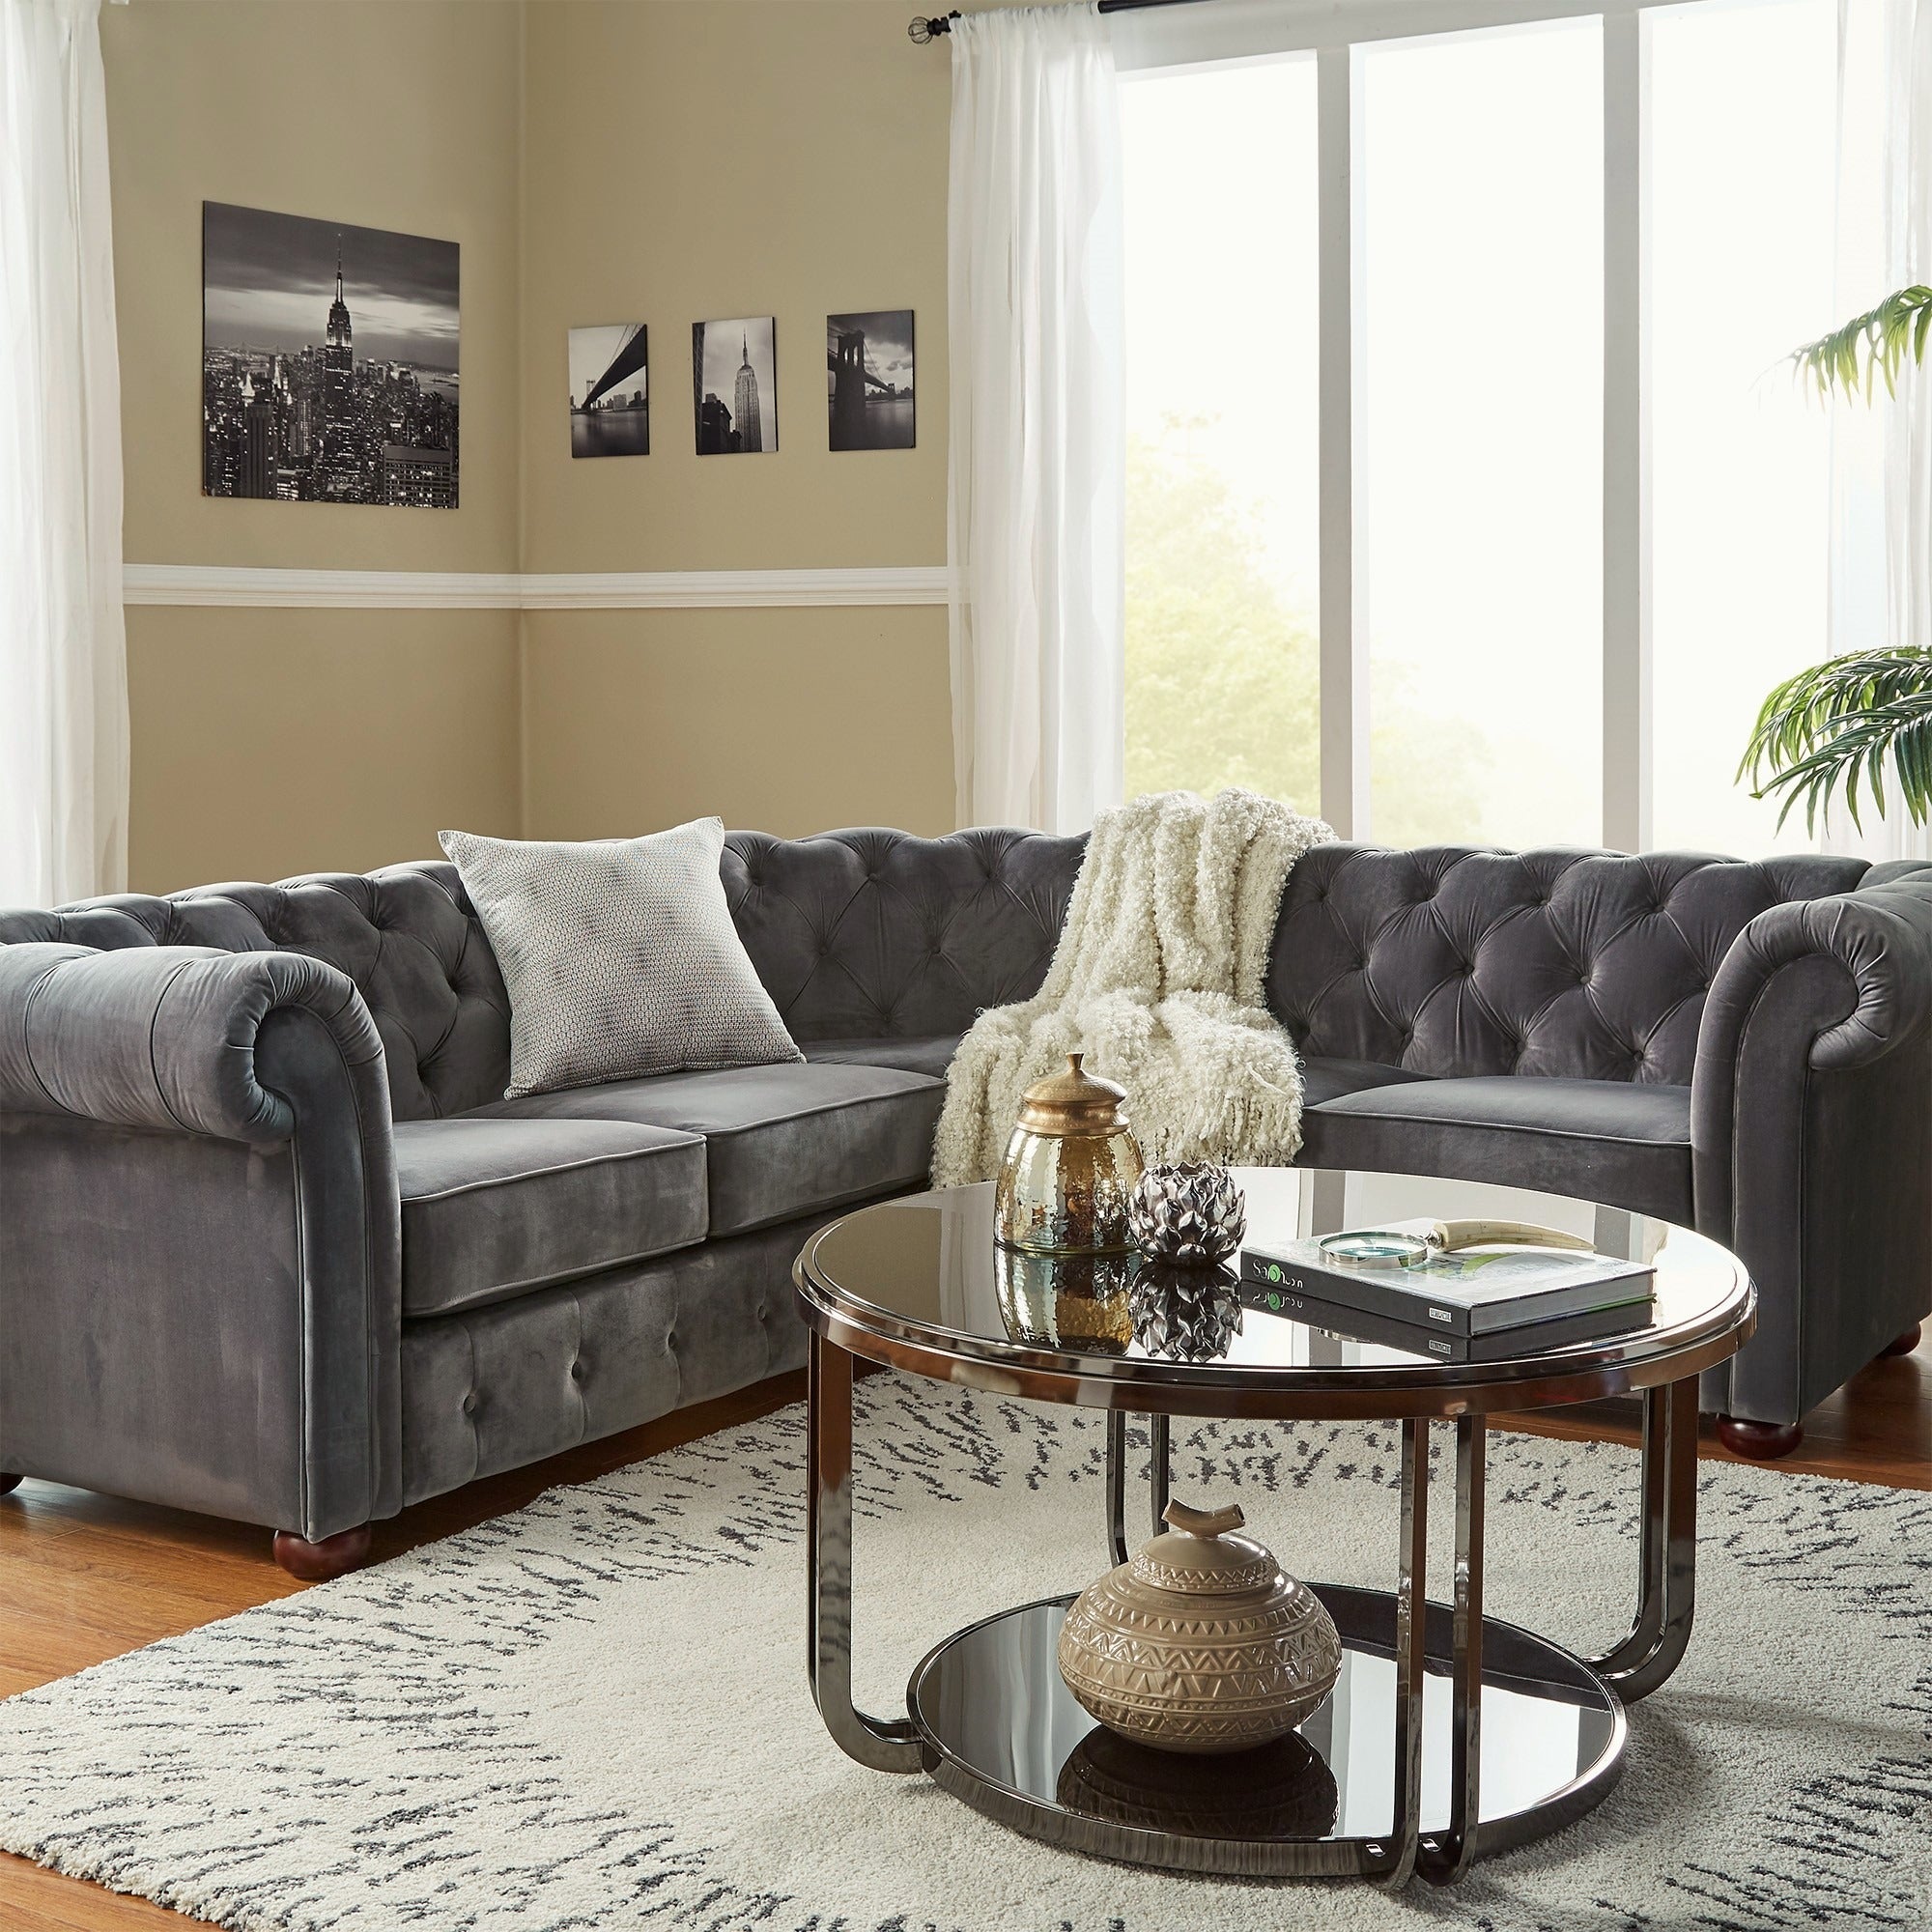 In this guide on how to buy furniture online, we wanted to show the different types of seating you could have in a living space. This image depicts the Dark Grey Velvet 5-Seat Chesterfield Sectional Sofa from iNSPIRE Q Artisan.